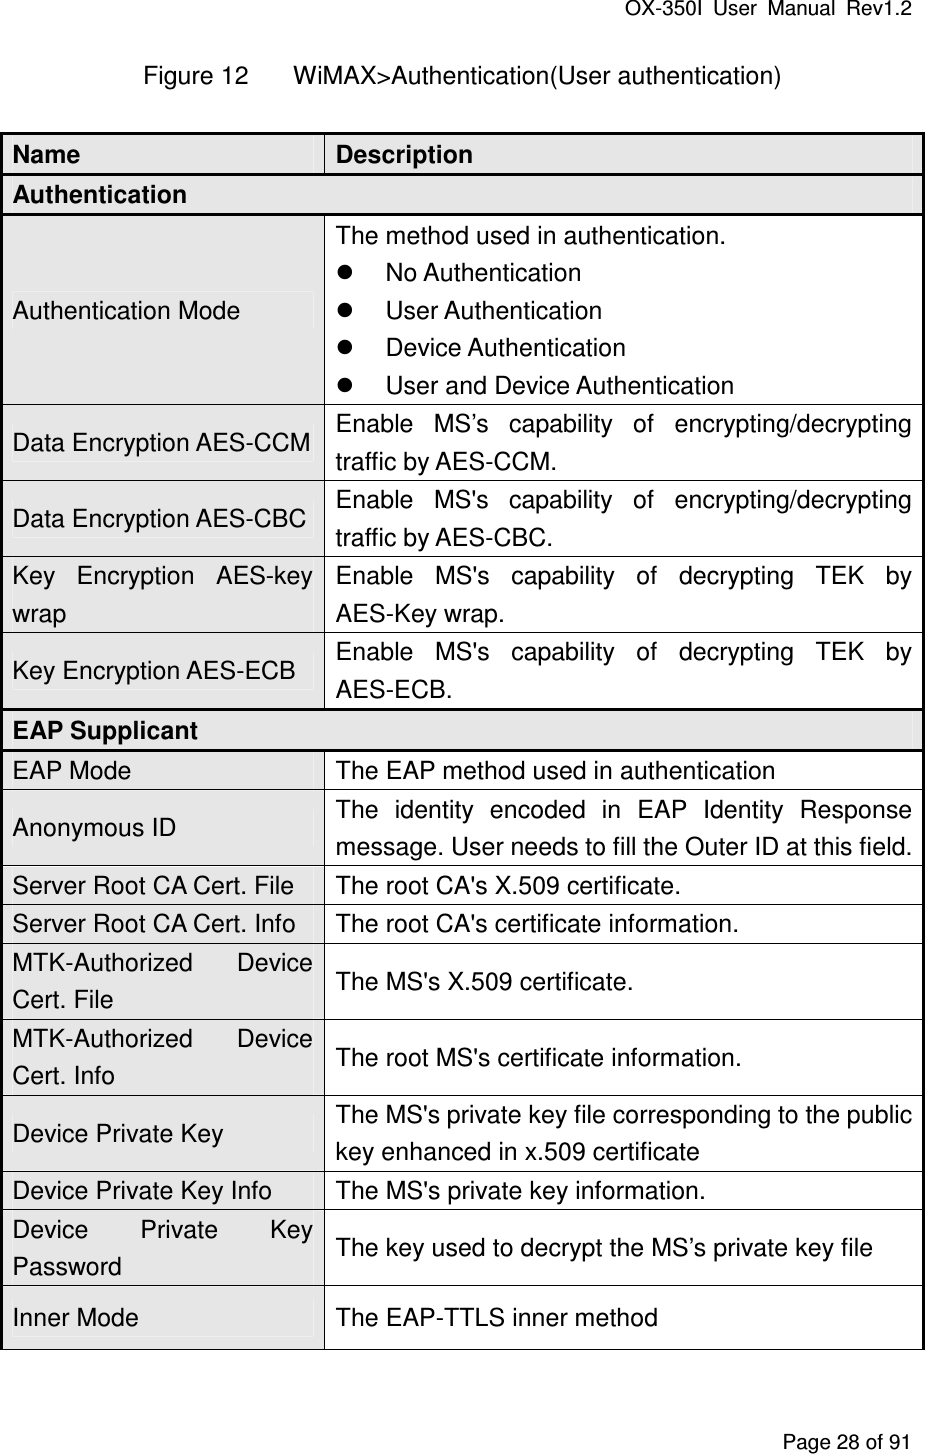 OX-350I  User  Manual  Rev1.2 Page 28 of 91 Figure 12  WiMAX&gt;Authentication(User authentication) Name  Description Authentication Authentication Mode The method used in authentication.   No Authentication   User Authentication   Device Authentication   User and Device Authentication Data Encryption AES-CCM Enable  MS’s  capability  of  encrypting/decrypting traffic by AES-CCM. Data Encryption AES-CBC Enable  MS&apos;s  capability  of  encrypting/decrypting traffic by AES-CBC. Key  Encryption  AES-key wrap Enable  MS&apos;s  capability  of  decrypting  TEK  by AES-Key wrap. Key Encryption AES-ECB  Enable  MS&apos;s  capability  of  decrypting  TEK  by AES-ECB. EAP Supplicant EAP Mode  The EAP method used in authentication Anonymous ID  The  identity  encoded  in  EAP  Identity  Response message. User needs to fill the Outer ID at this field. Server Root CA Cert. File  The root CA&apos;s X.509 certificate. Server Root CA Cert. Info  The root CA&apos;s certificate information. MTK-Authorized  Device Cert. File  The MS&apos;s X.509 certificate. MTK-Authorized  Device Cert. Info  The root MS&apos;s certificate information. Device Private Key  The MS&apos;s private key file corresponding to the public key enhanced in x.509 certificate Device Private Key Info  The MS&apos;s private key information. Device  Private  Key Password  The key used to decrypt the MS’s private key file Inner Mode  The EAP-TTLS inner method 